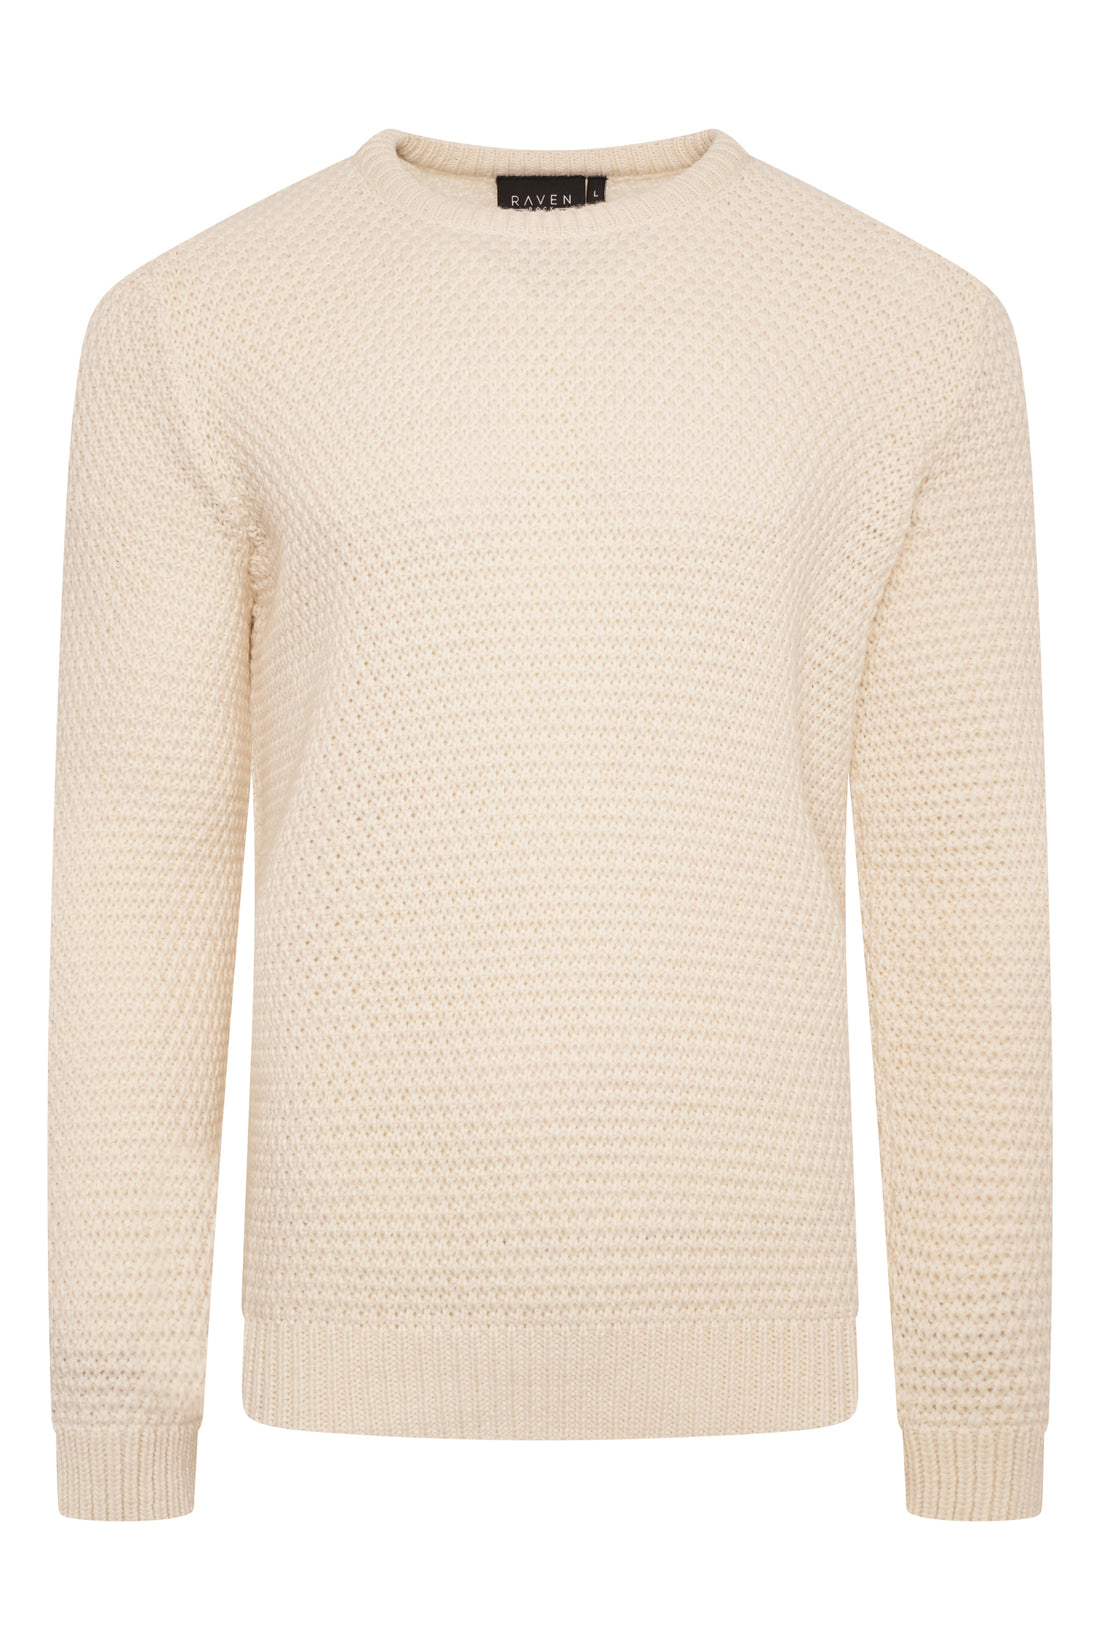 Mens Chunky Wool Jumper | Moss Stitch Jumper | Made In Britain – RAVEN ...